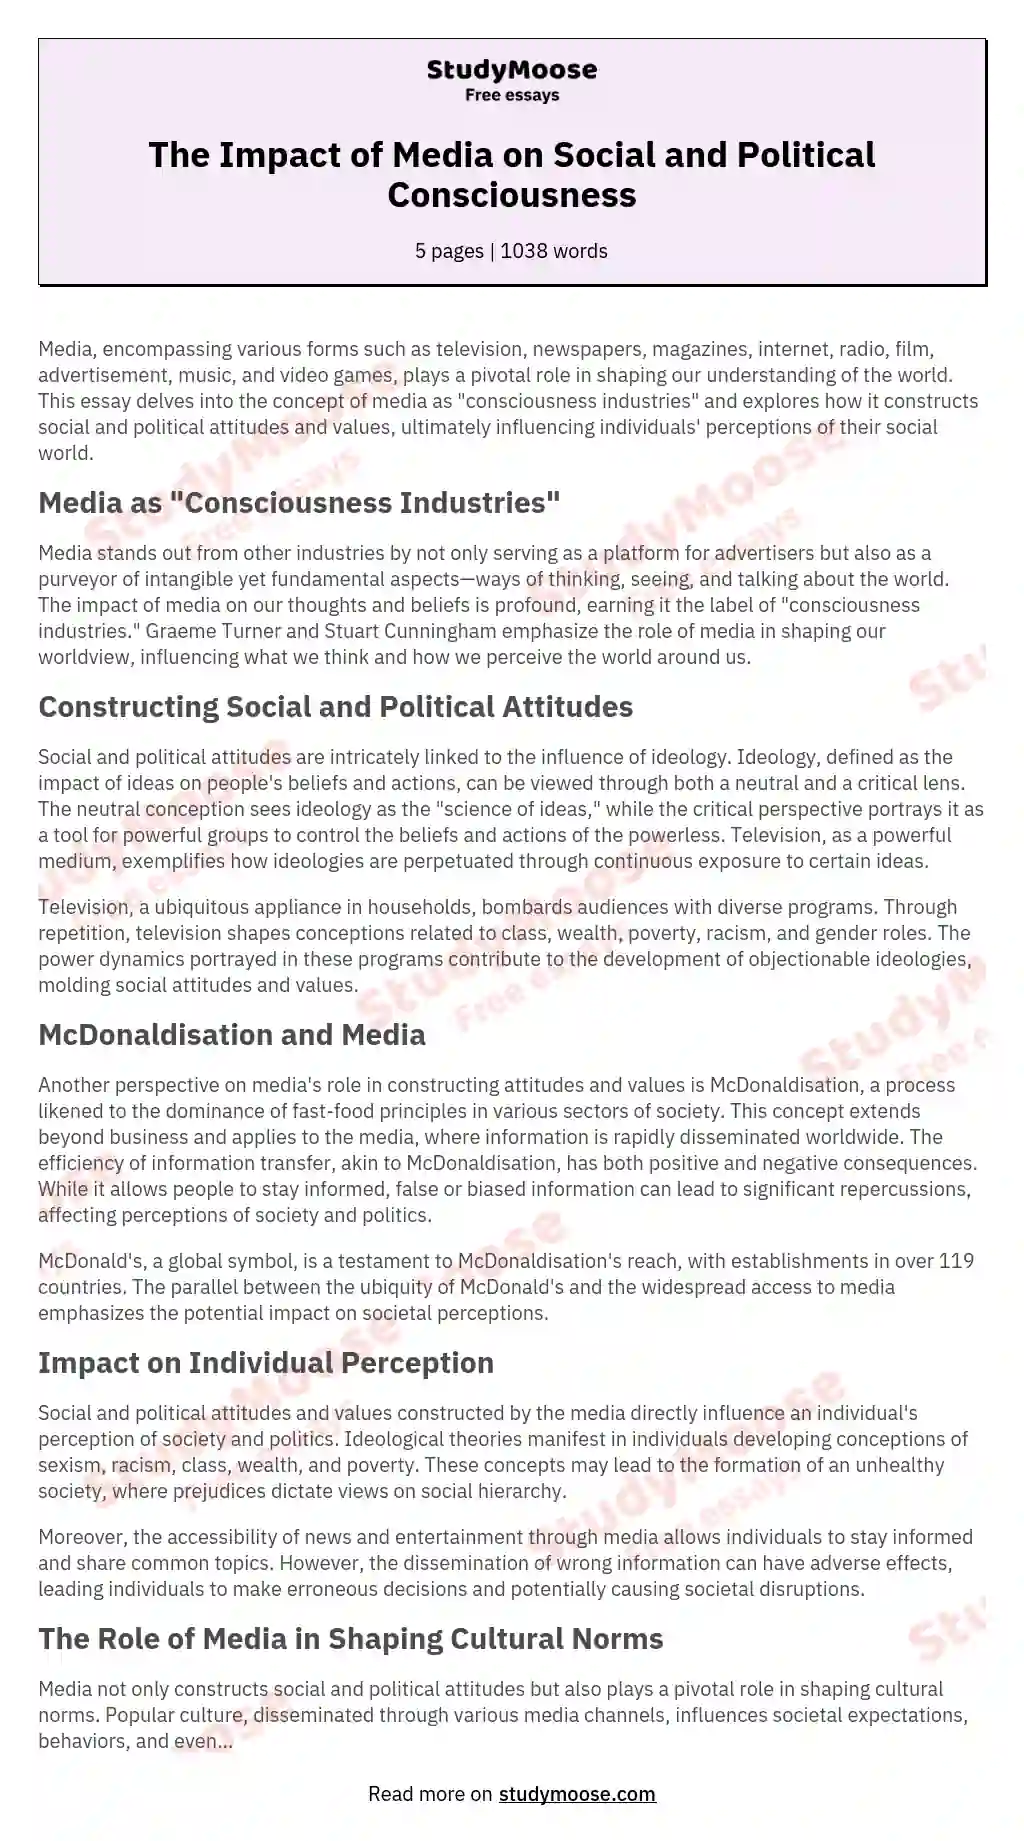 The Impact of Media on Social and Political Consciousness essay